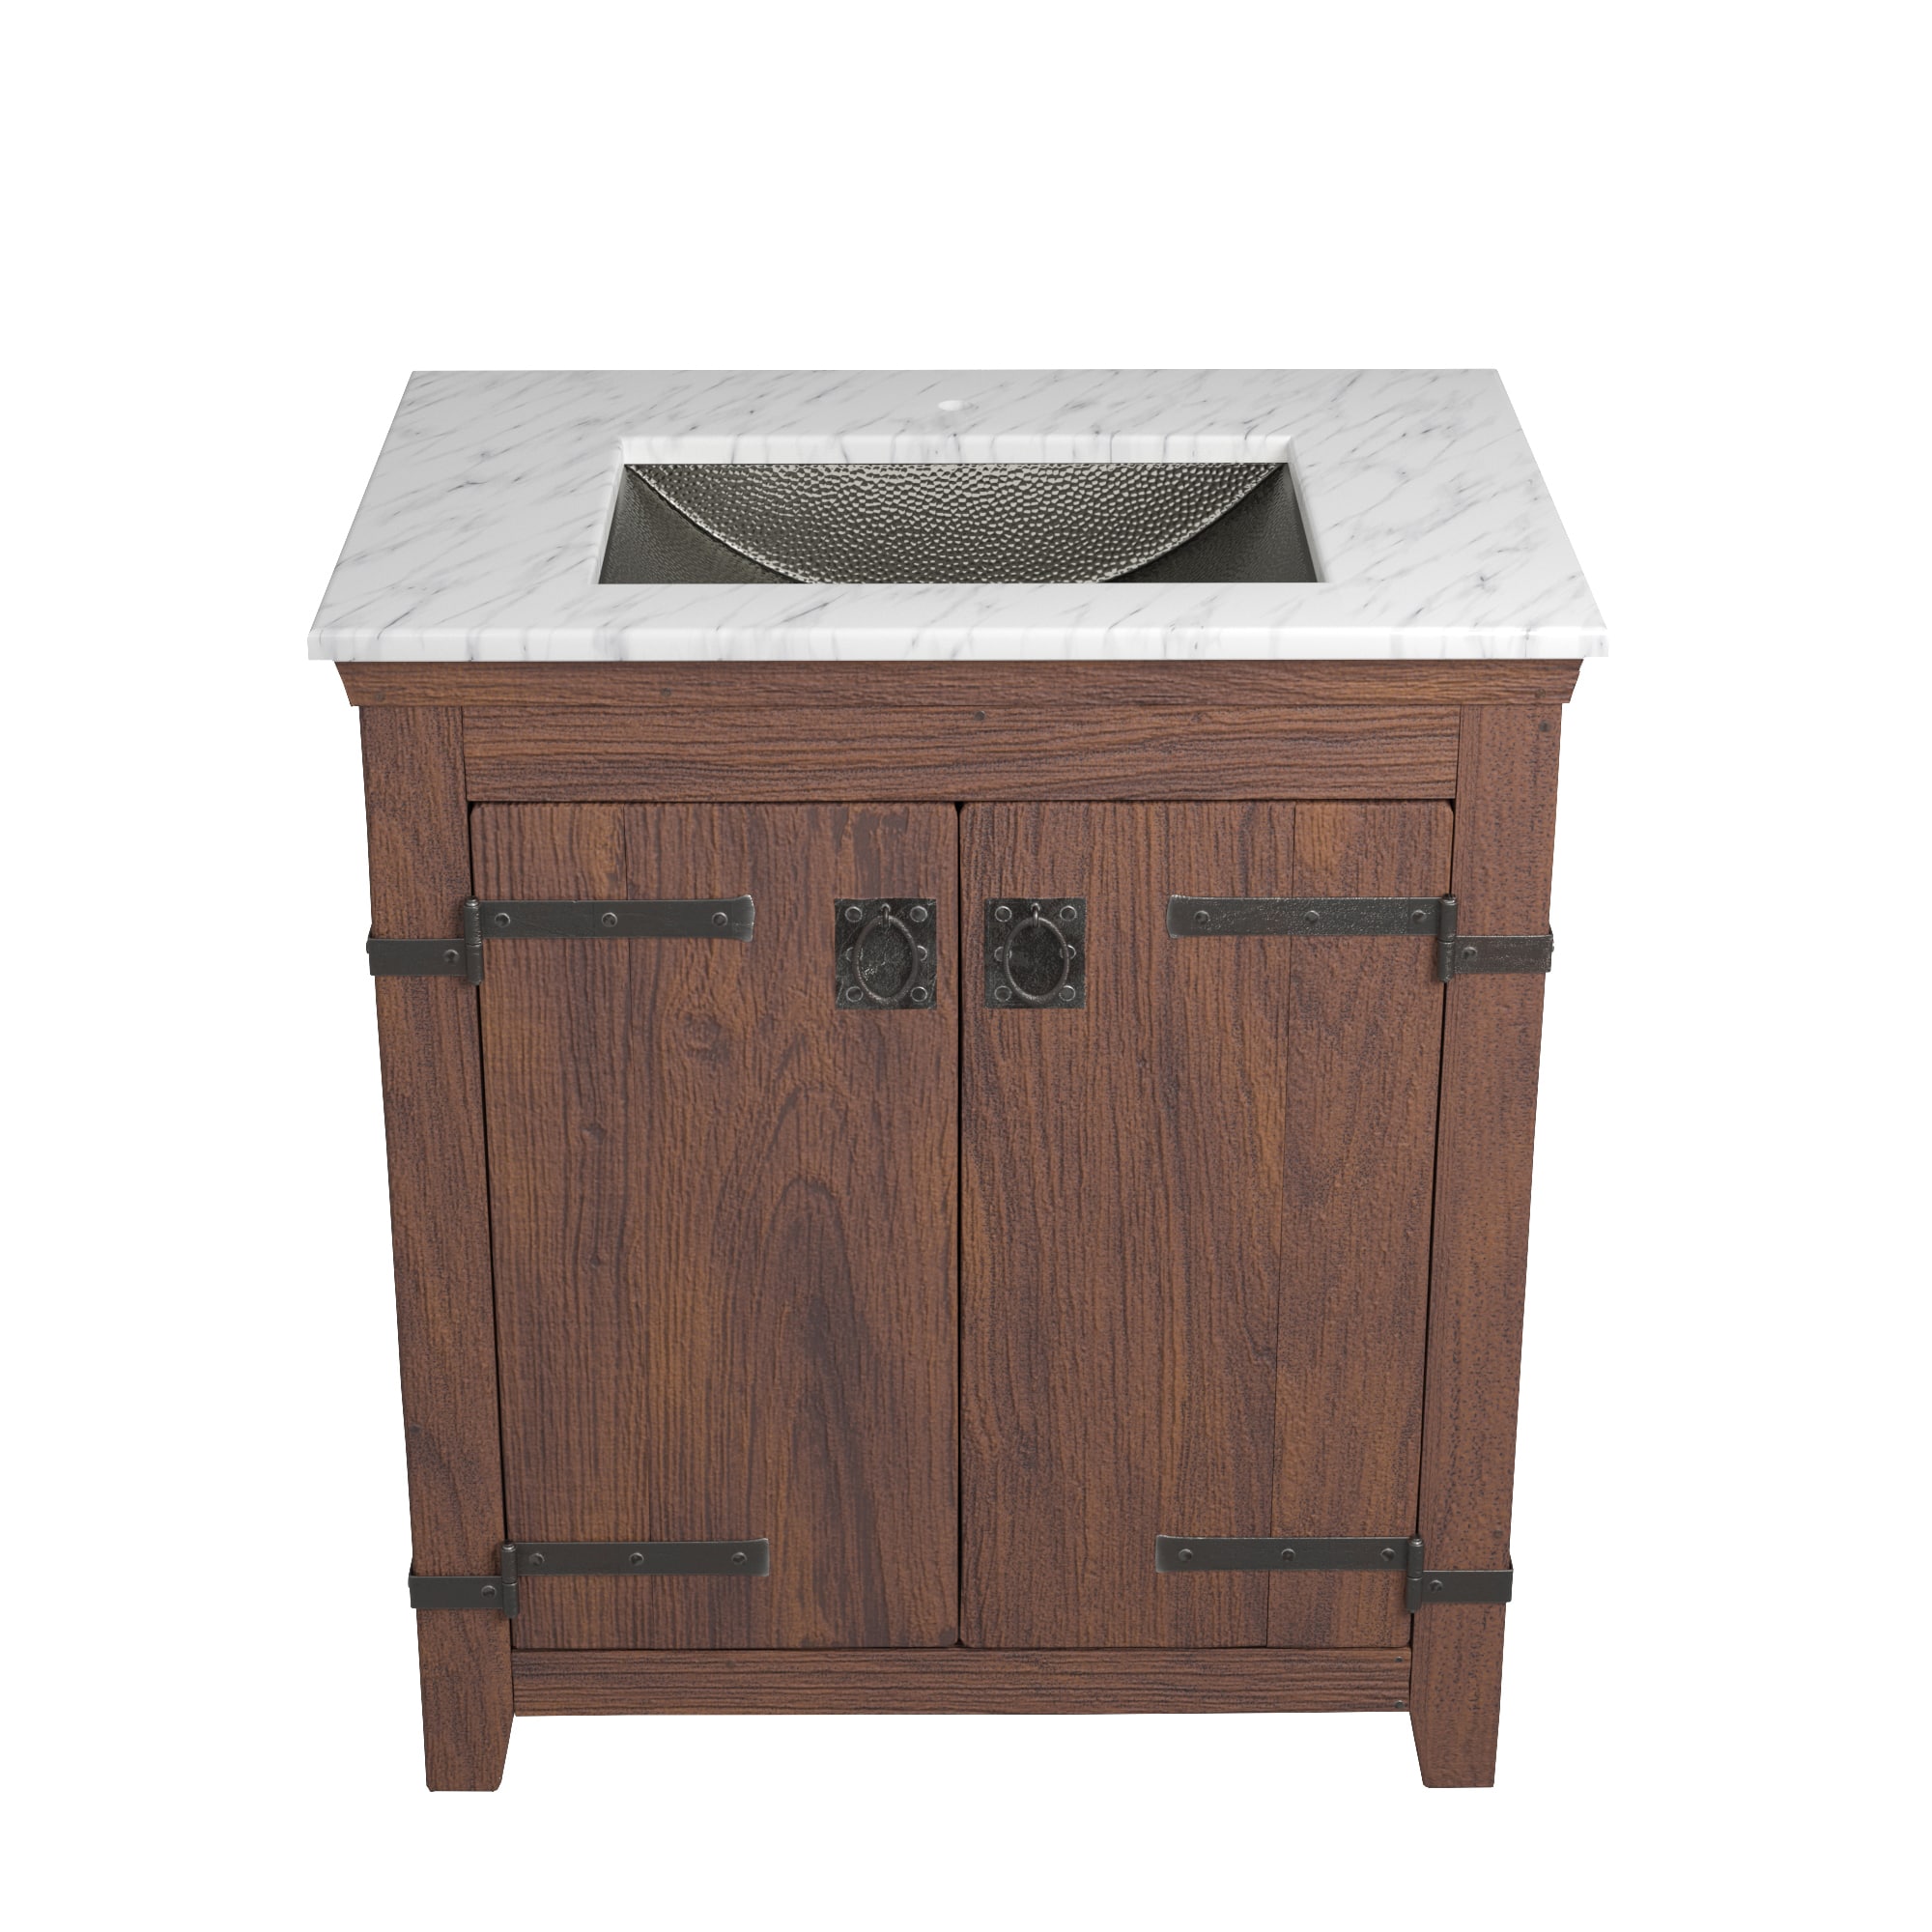 Native Trails 30" Americana Vanity in Chestnut with Carrara Marble Top and Avila in Polished Nickel, Single Faucet Hole, BND30-VB-CT-CP-027